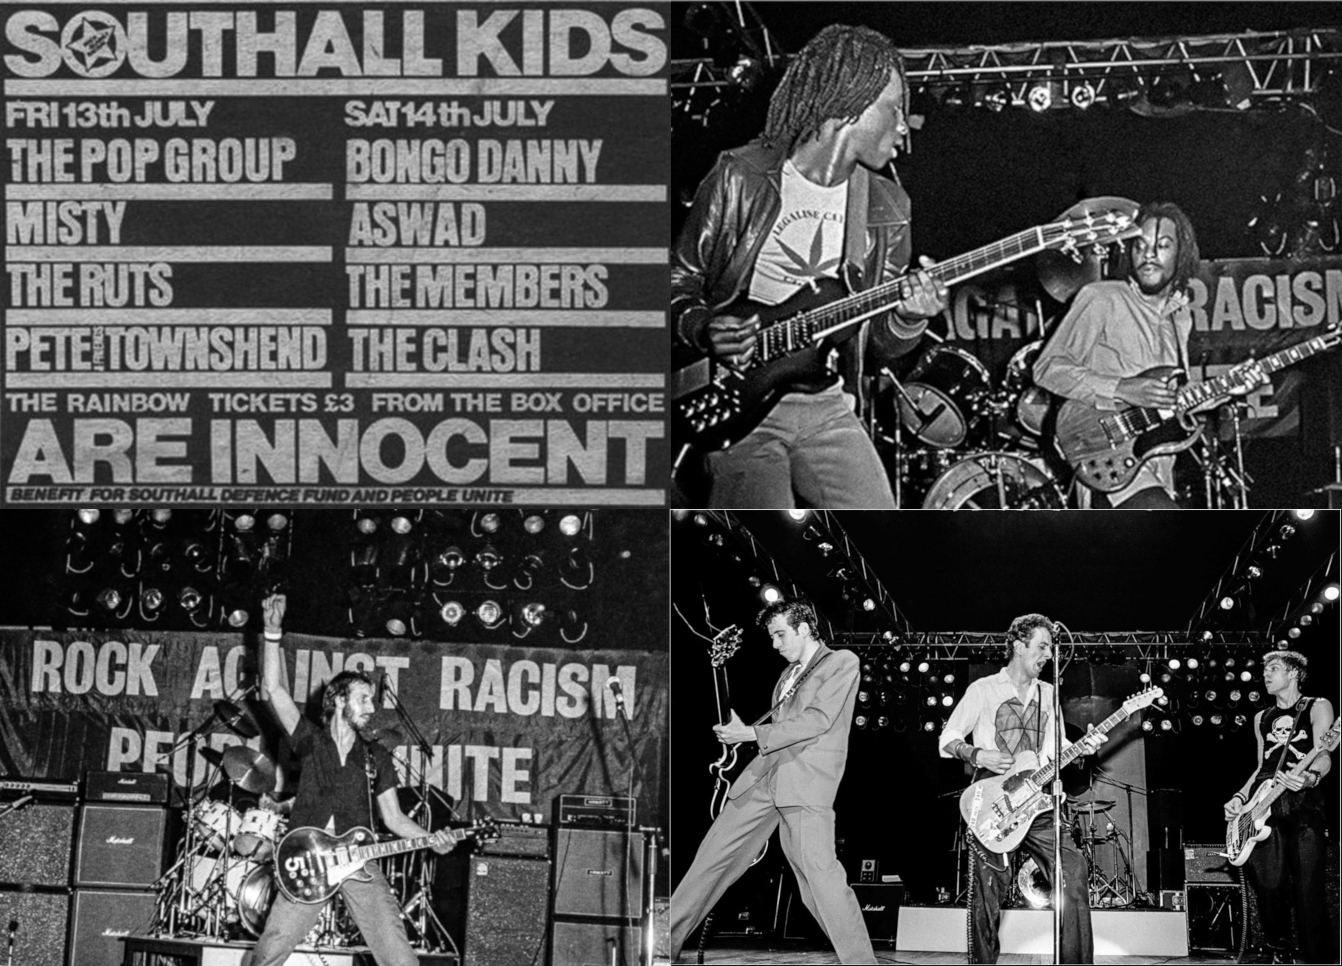 Shouthall Kids Are Innocent: ASWAD, Pete Townshend, The Clash (Ιούλιος 1979)